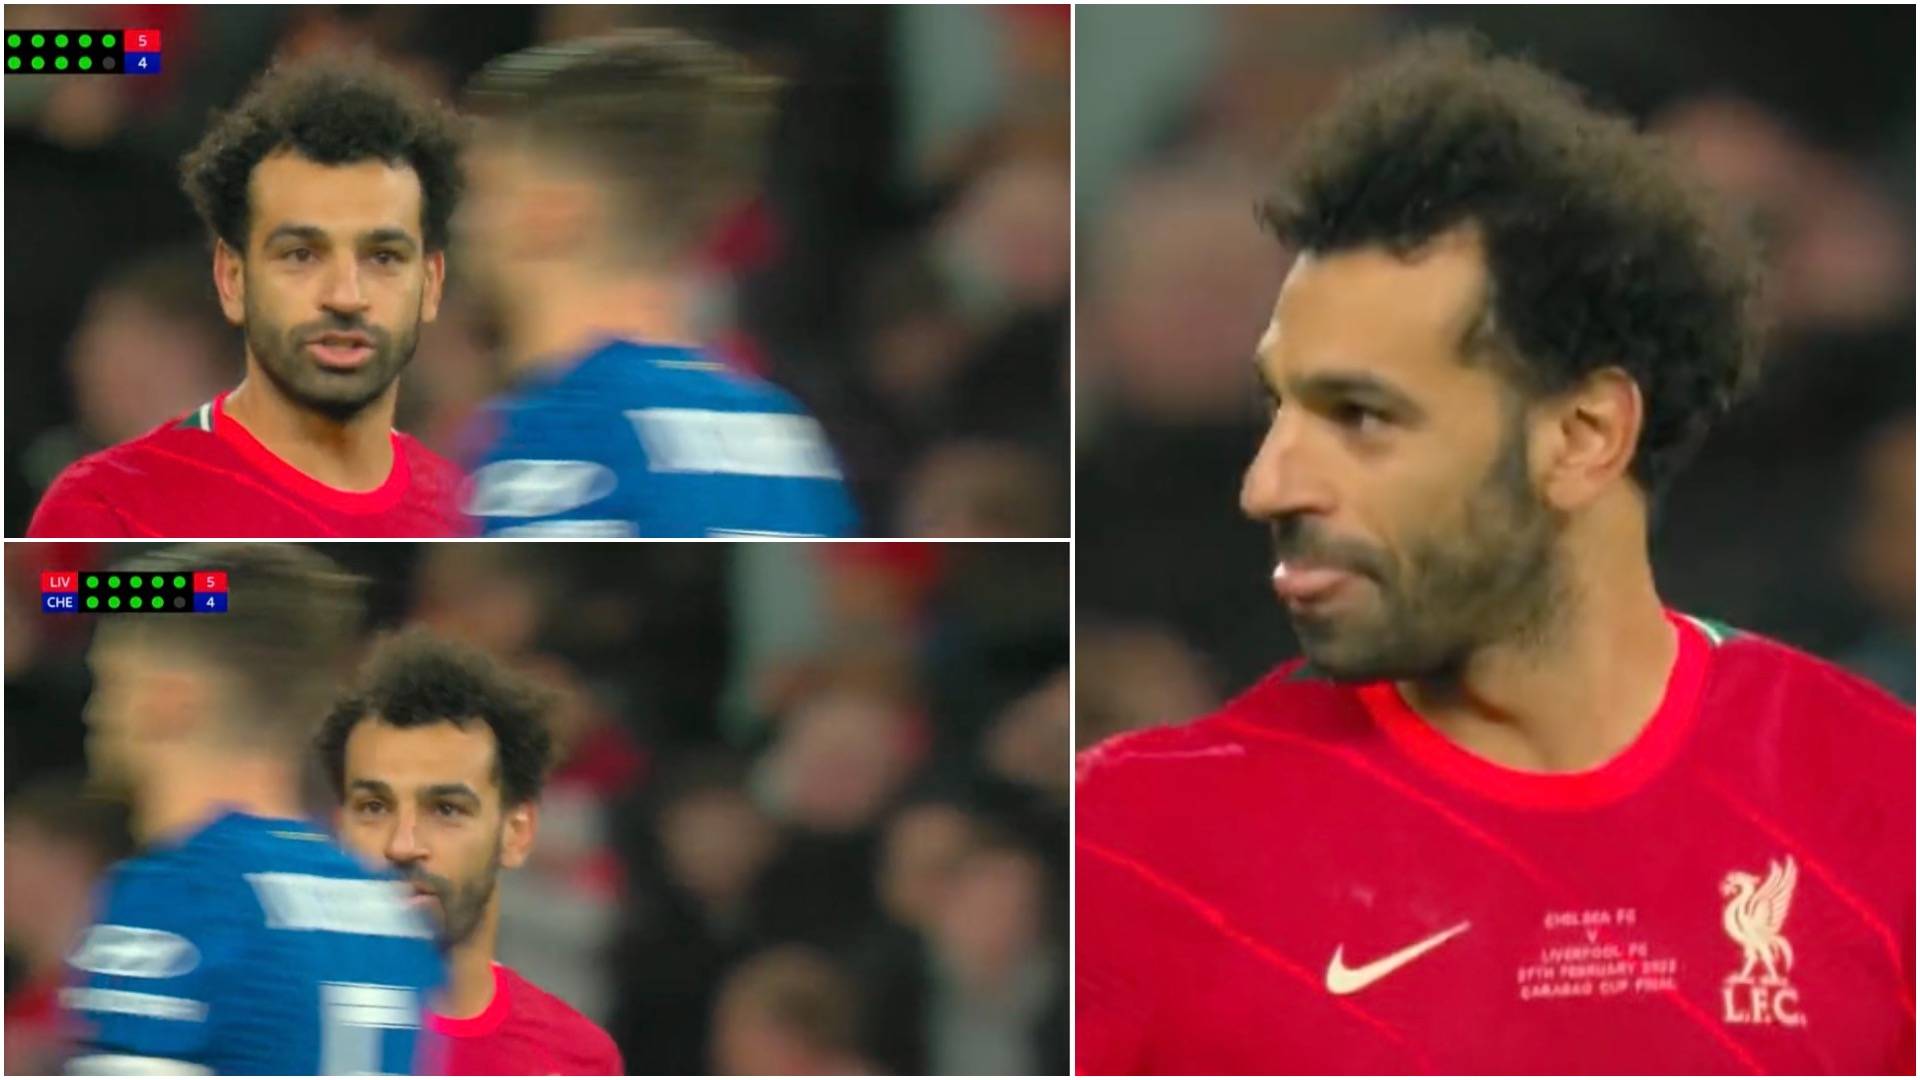 Fans think Mohamed Salah told Jorginho not to jump in Carabao Cup final penalty shoot-out